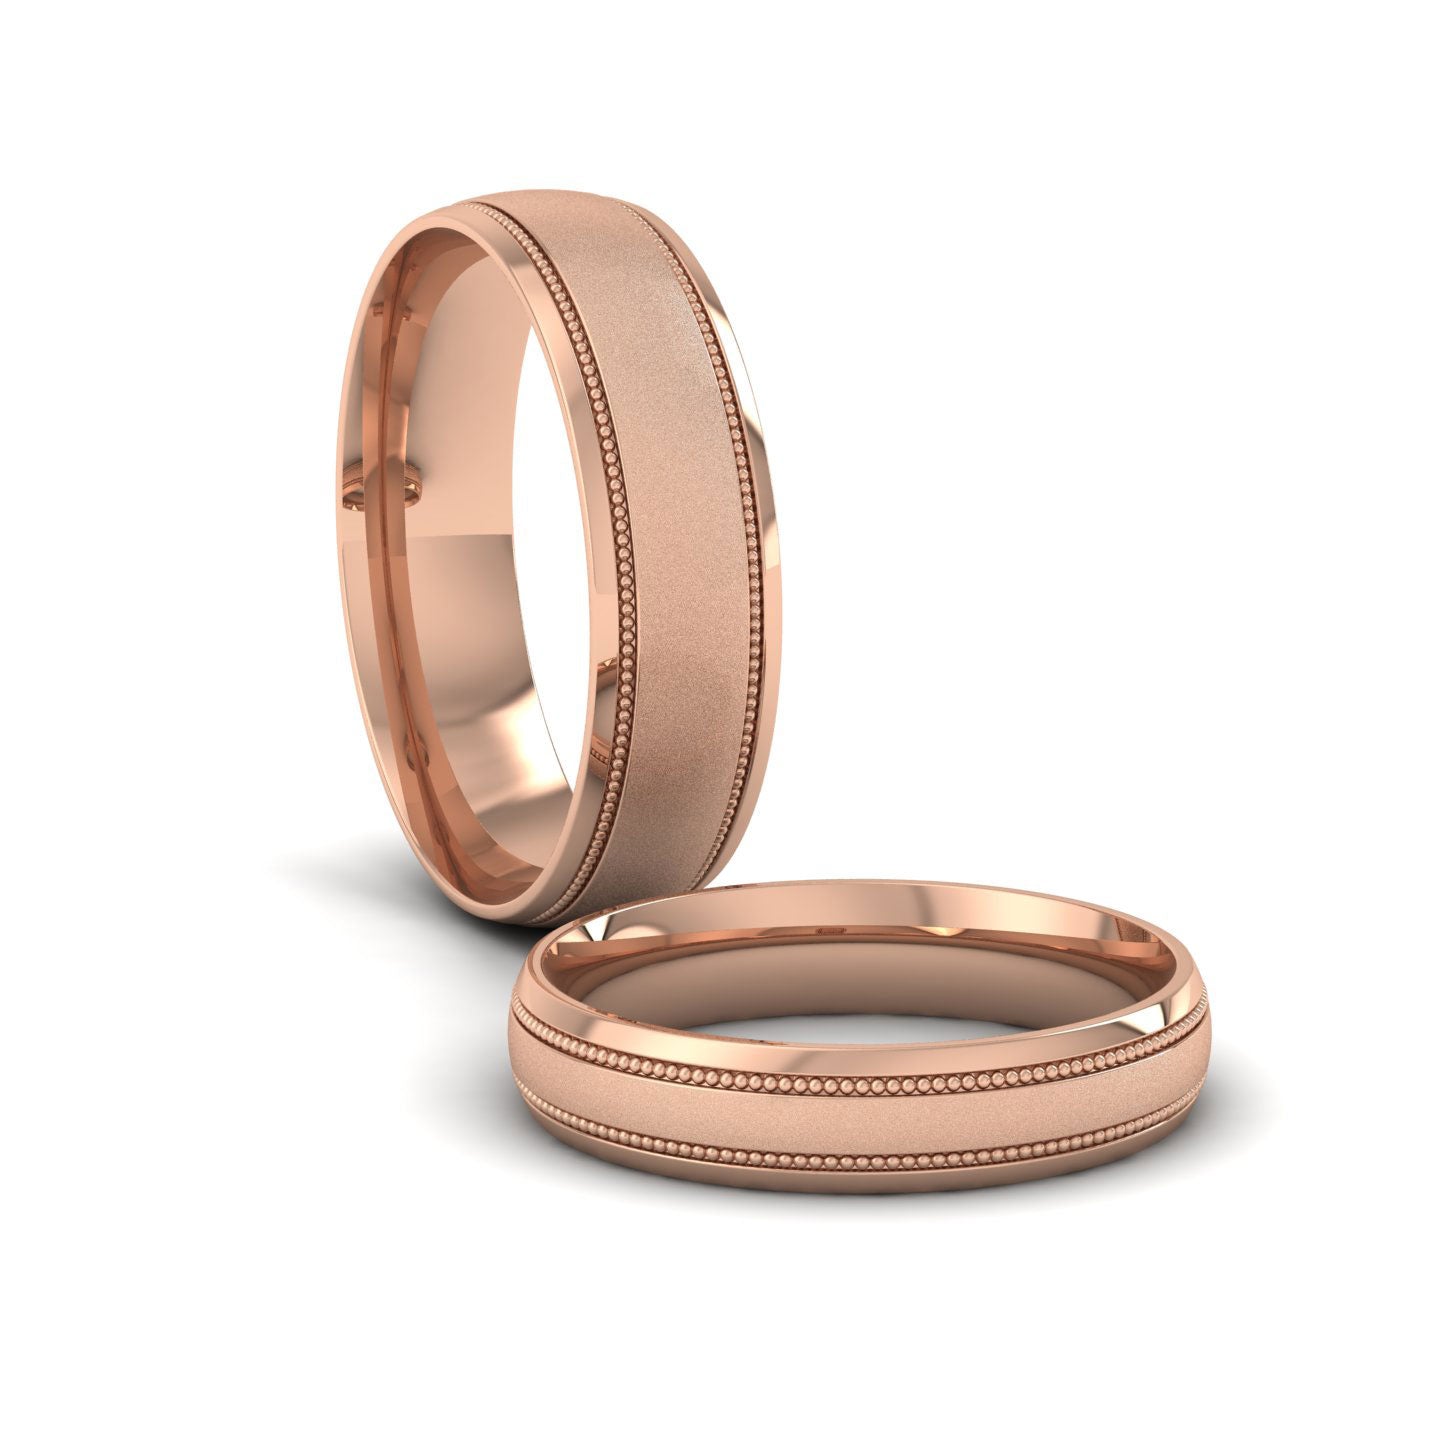 Millgrain And Contrasting Matt And Shiny Finish 9ct Rose Gold 6mm Wedding Ring